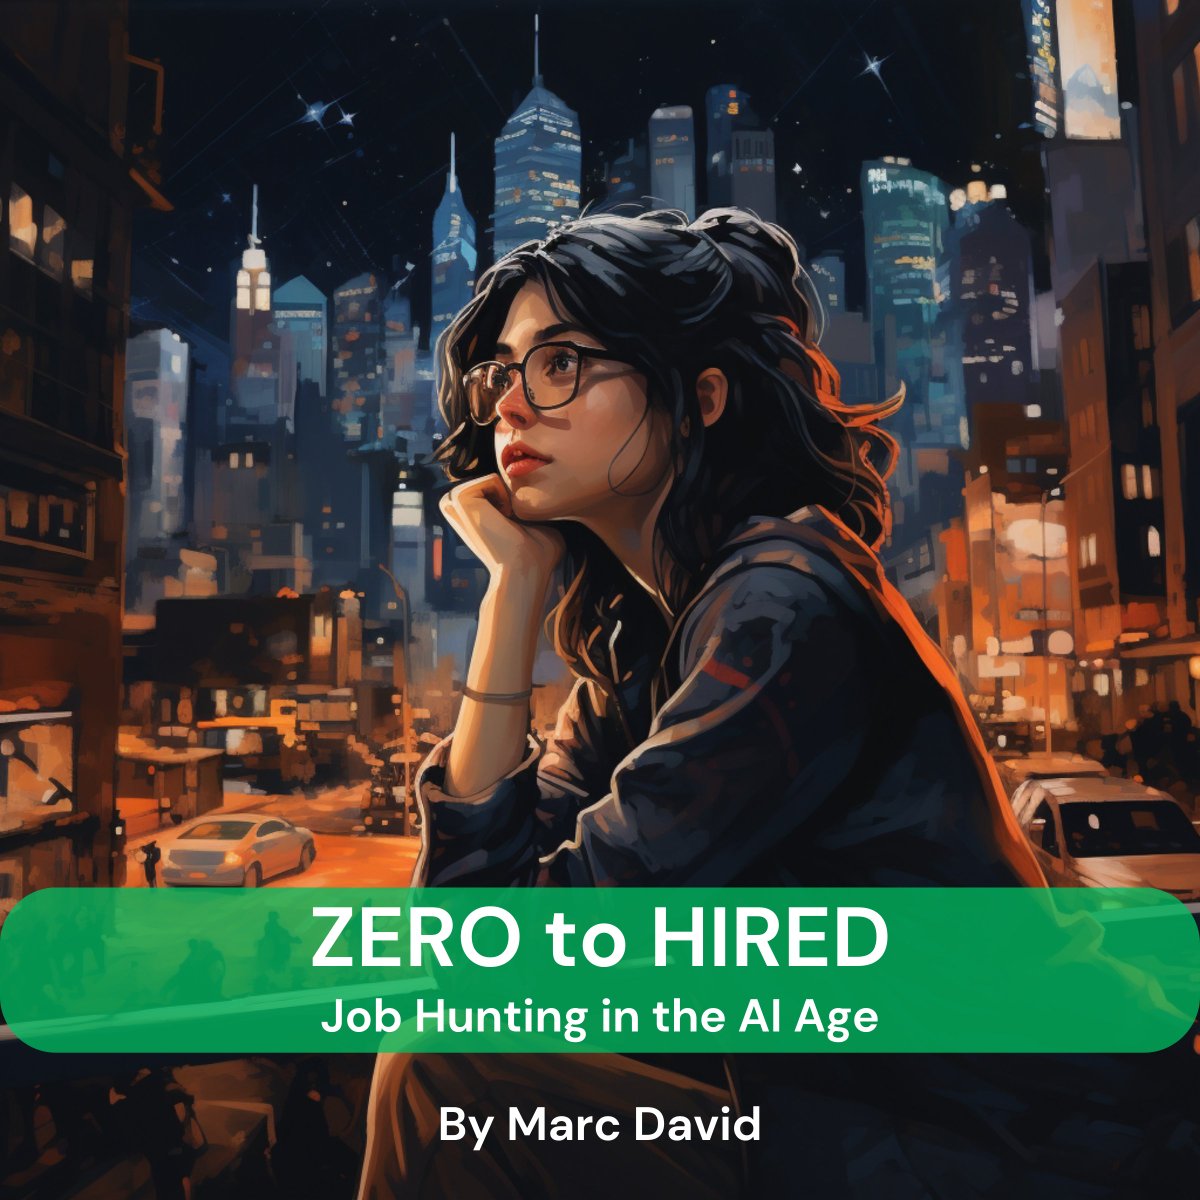 🎉 Tired of traditional job hunting methods? We've got the solution - 'Zero to Hired: Job Hunting in the AI Age'. Ready to revolutionize your job search? Visit justaskmarc.com/zerotohired to grab your copy now! #FutureOfWork #CareerRevolution #ZeroToHired